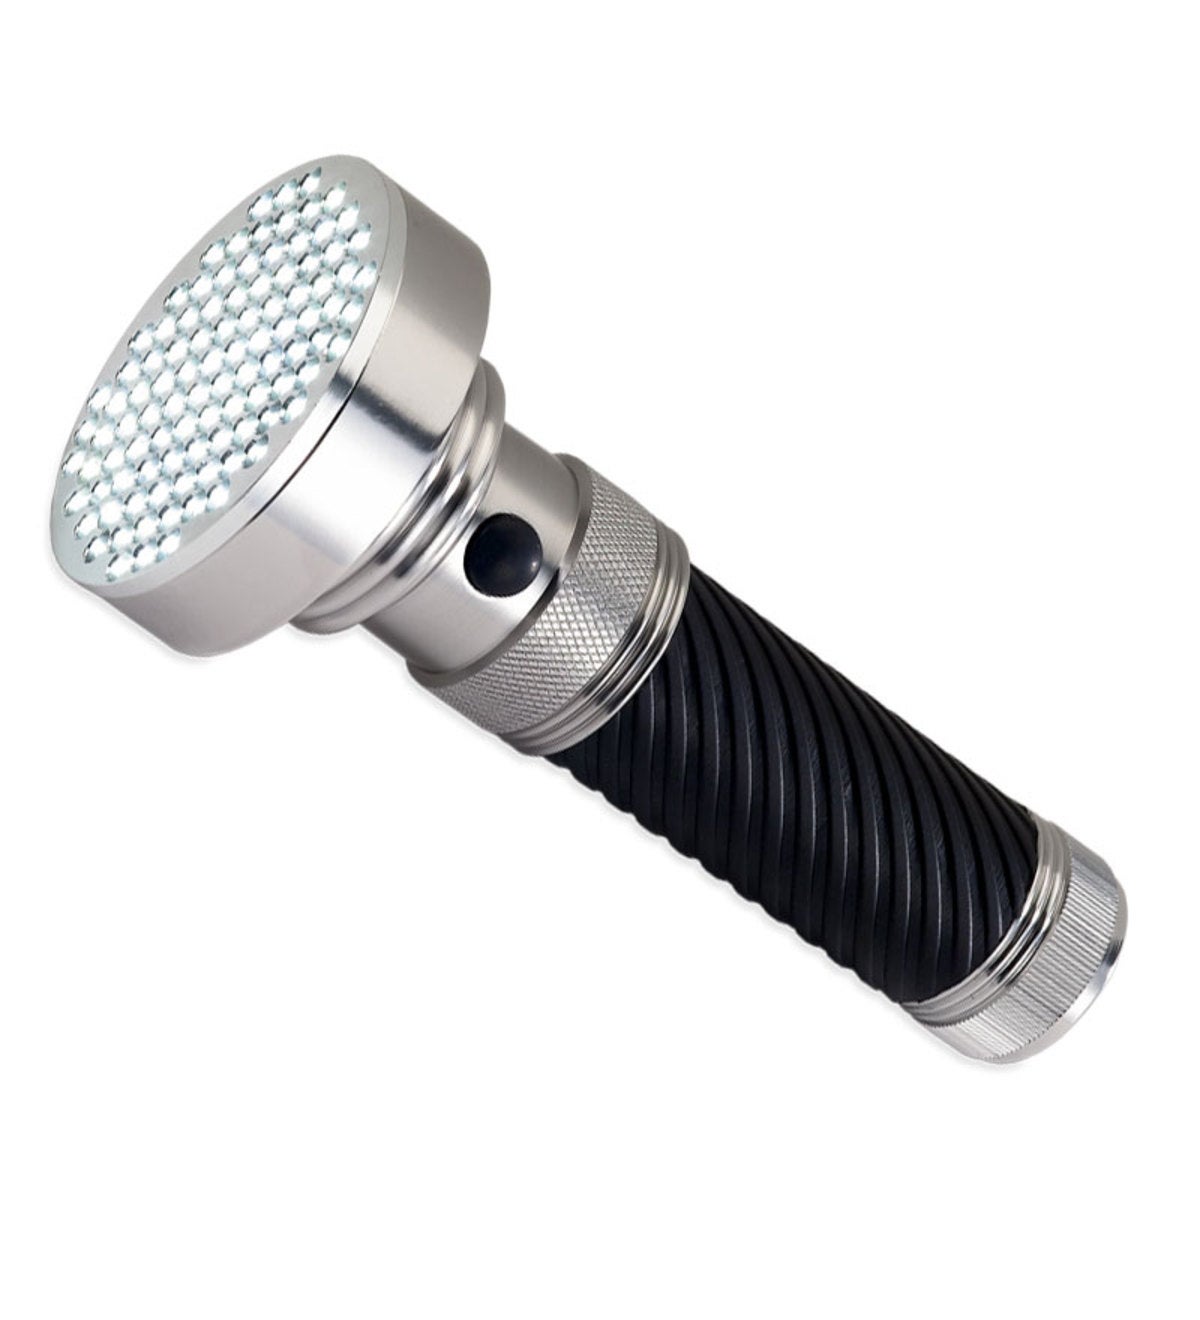 100 LED Industrial-Grade Aircraft-Aluminum Flashlight with Rubber Handle